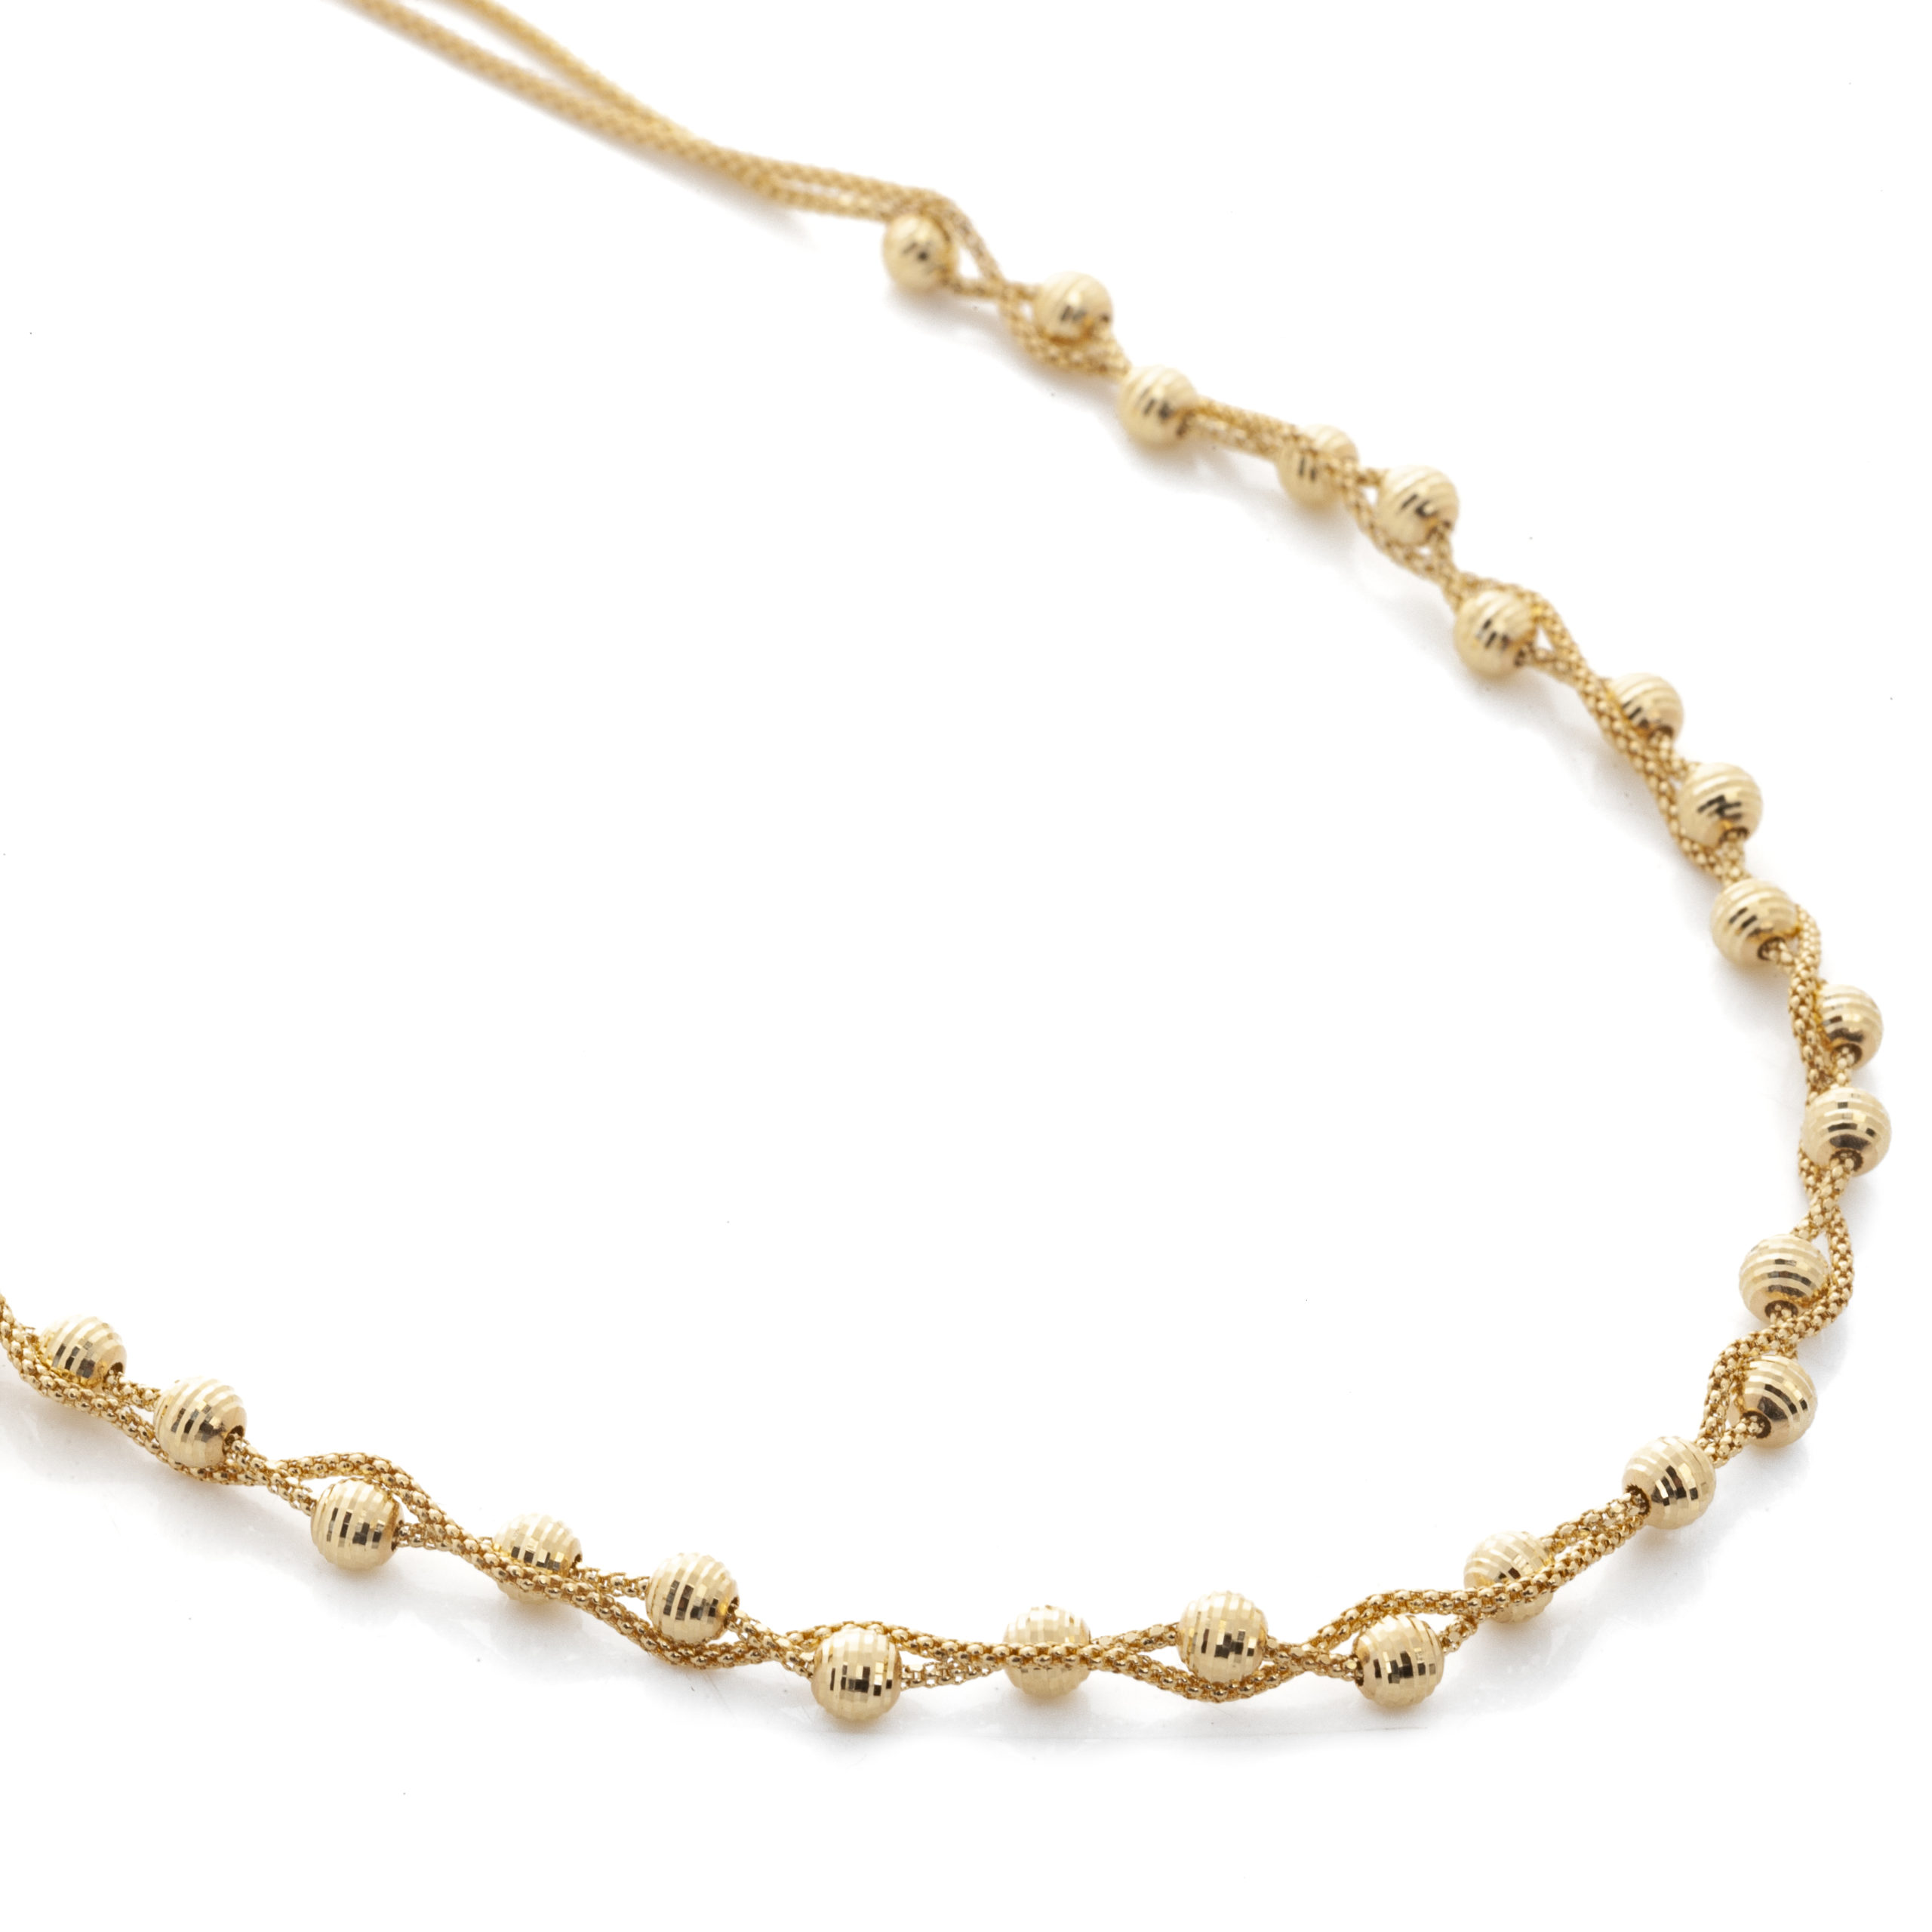 Ornate Gold Necklace with Balls